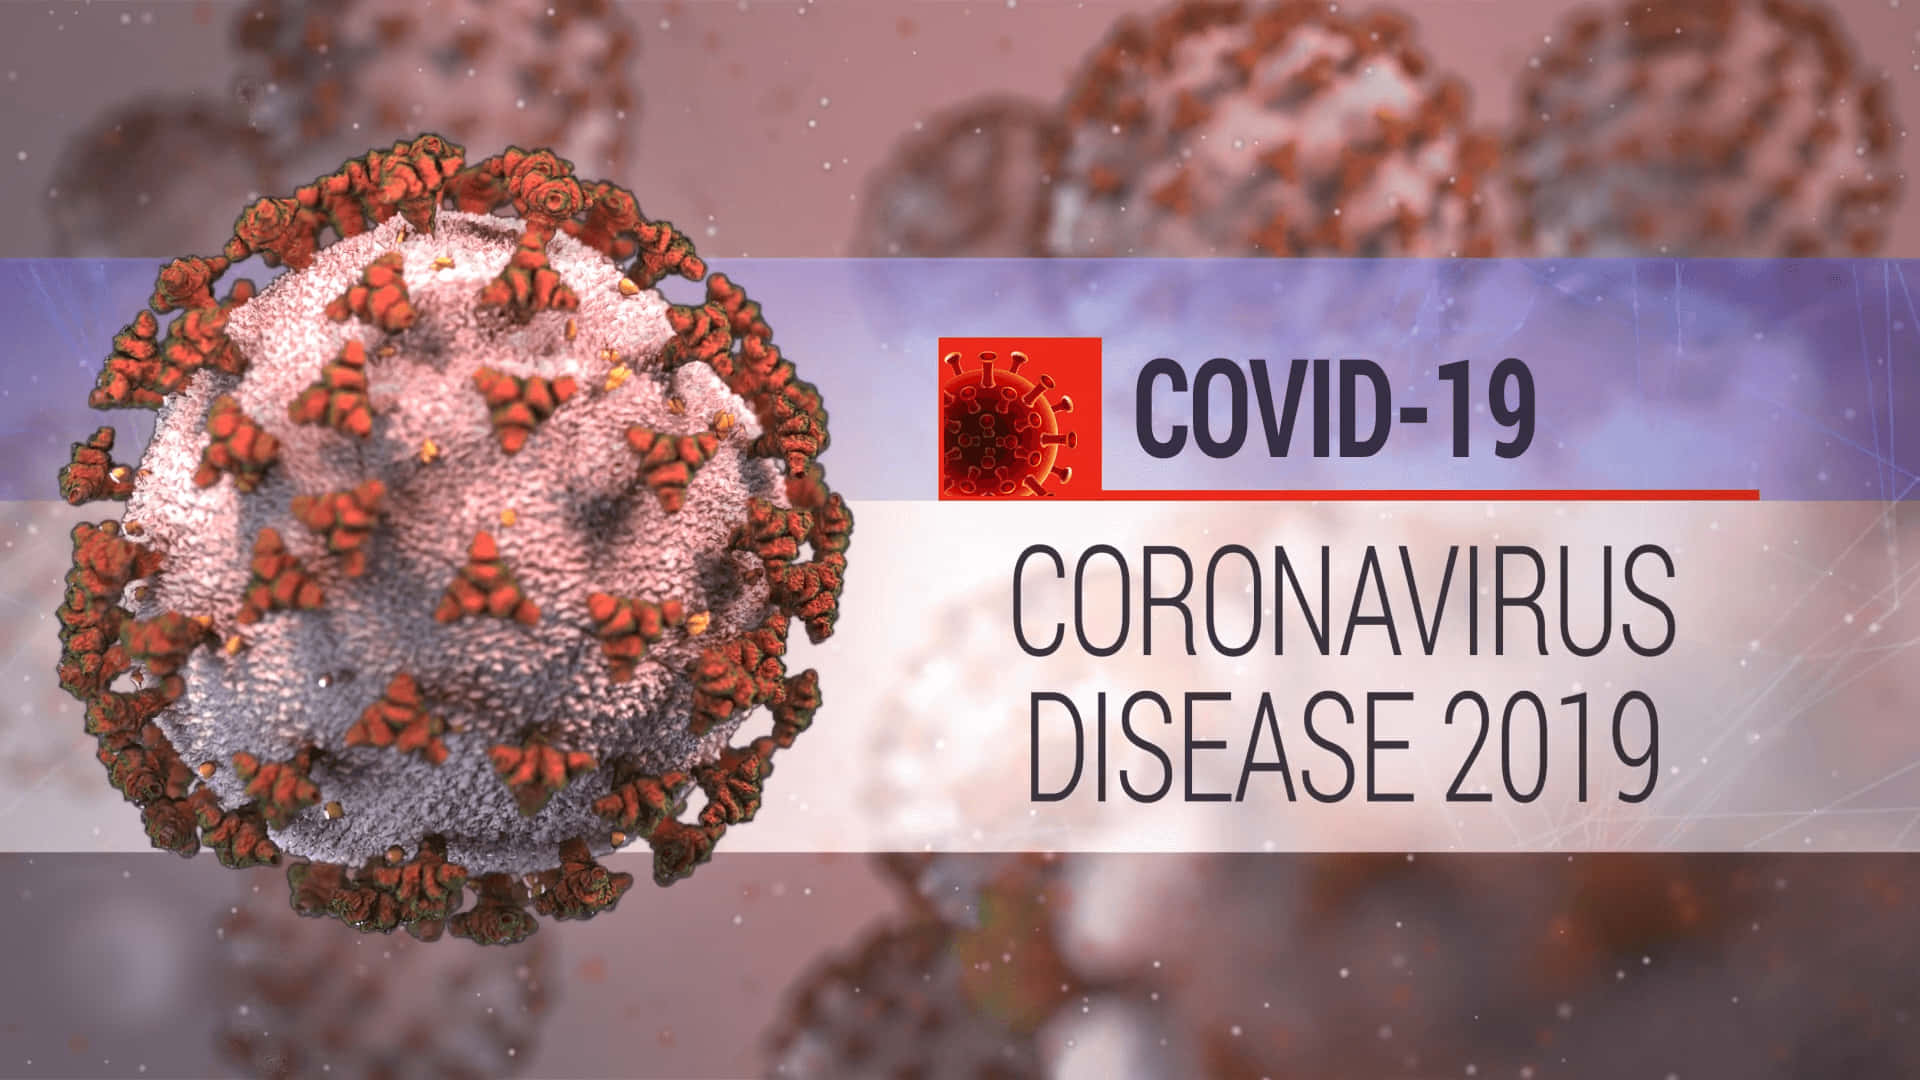 "A powerful depiction of the COVID-19 virus under the microscope"